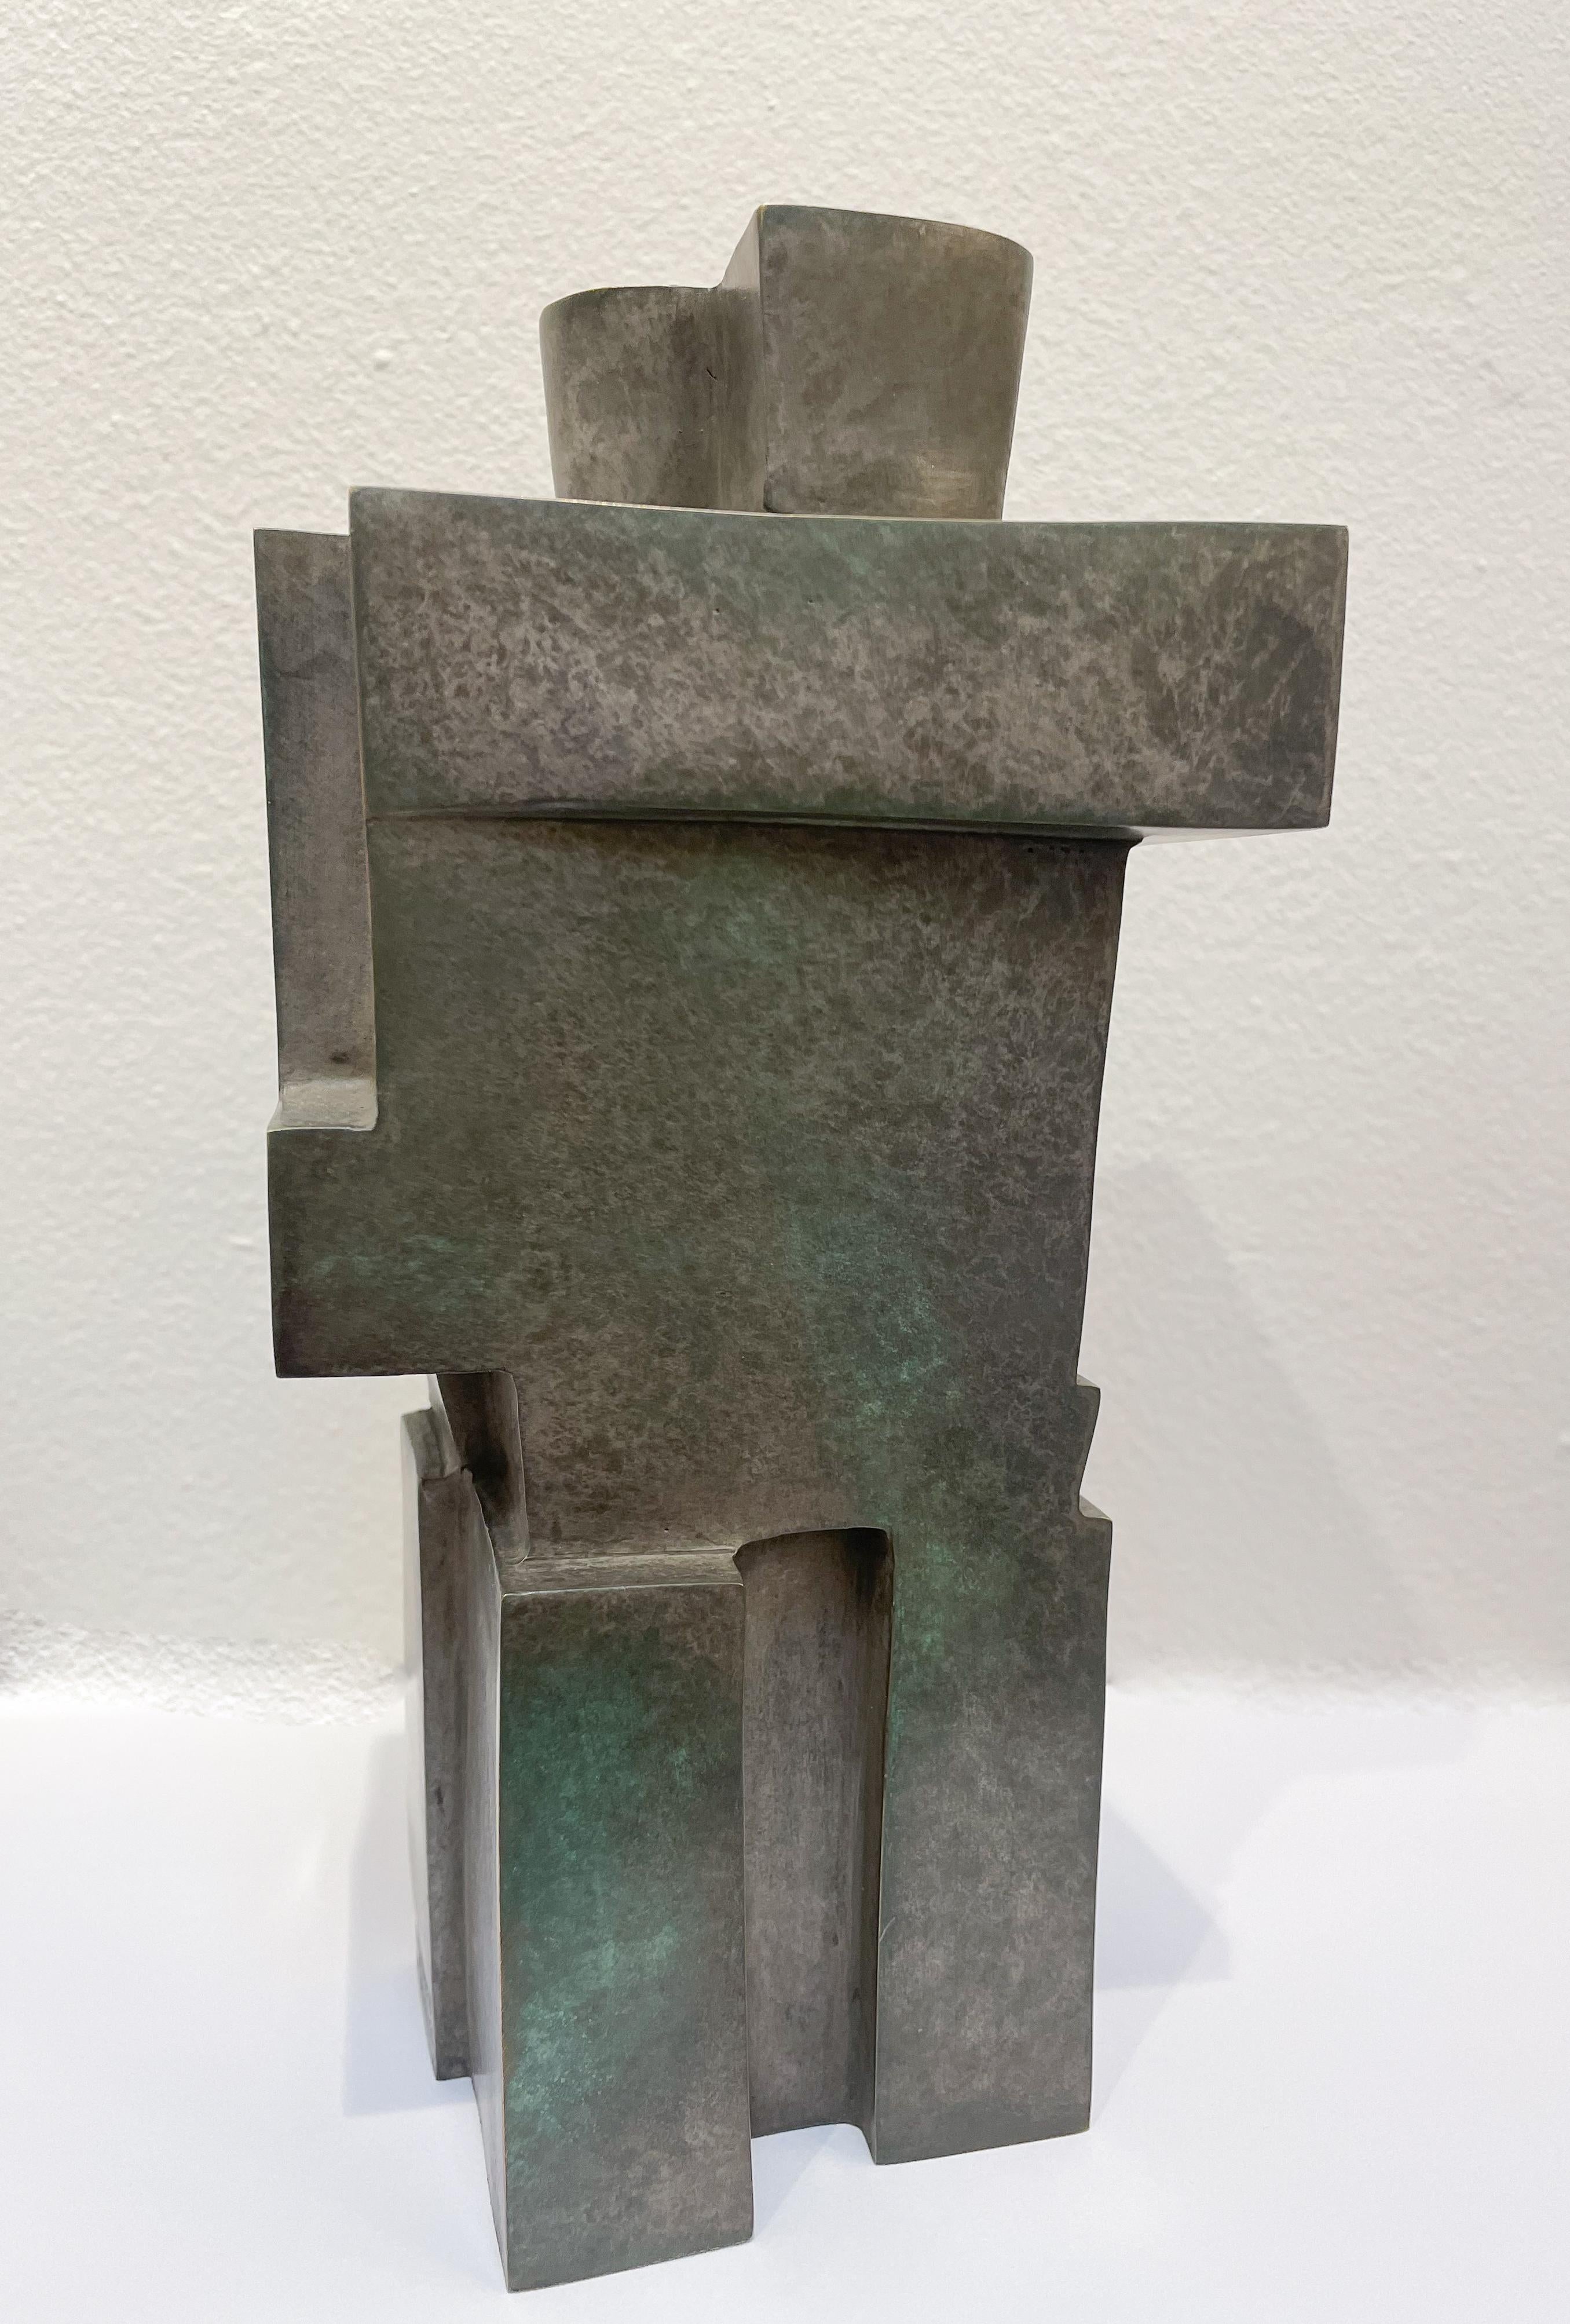 Cubist Bronze Sculpture 'The Twins' by Willy Kessels, 1920s For Sale 3